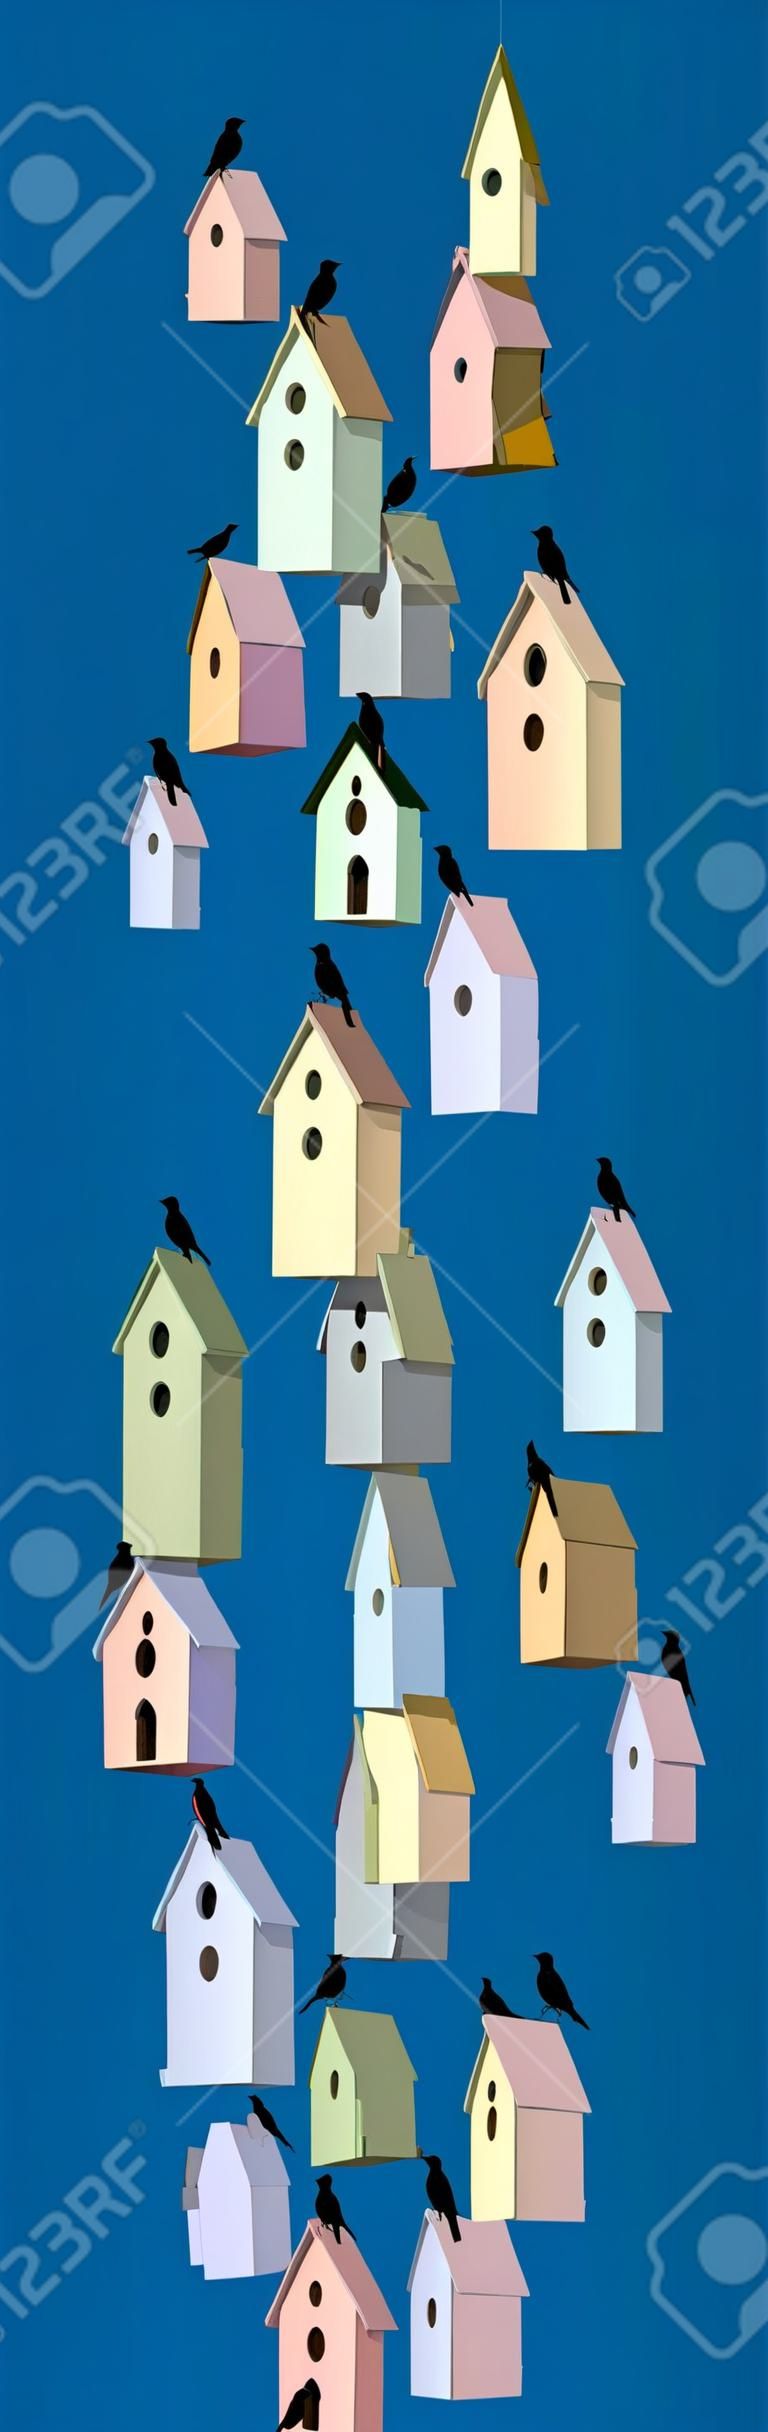 Multi-colored birdhouses built in the form of a skyscraper, minimalist style